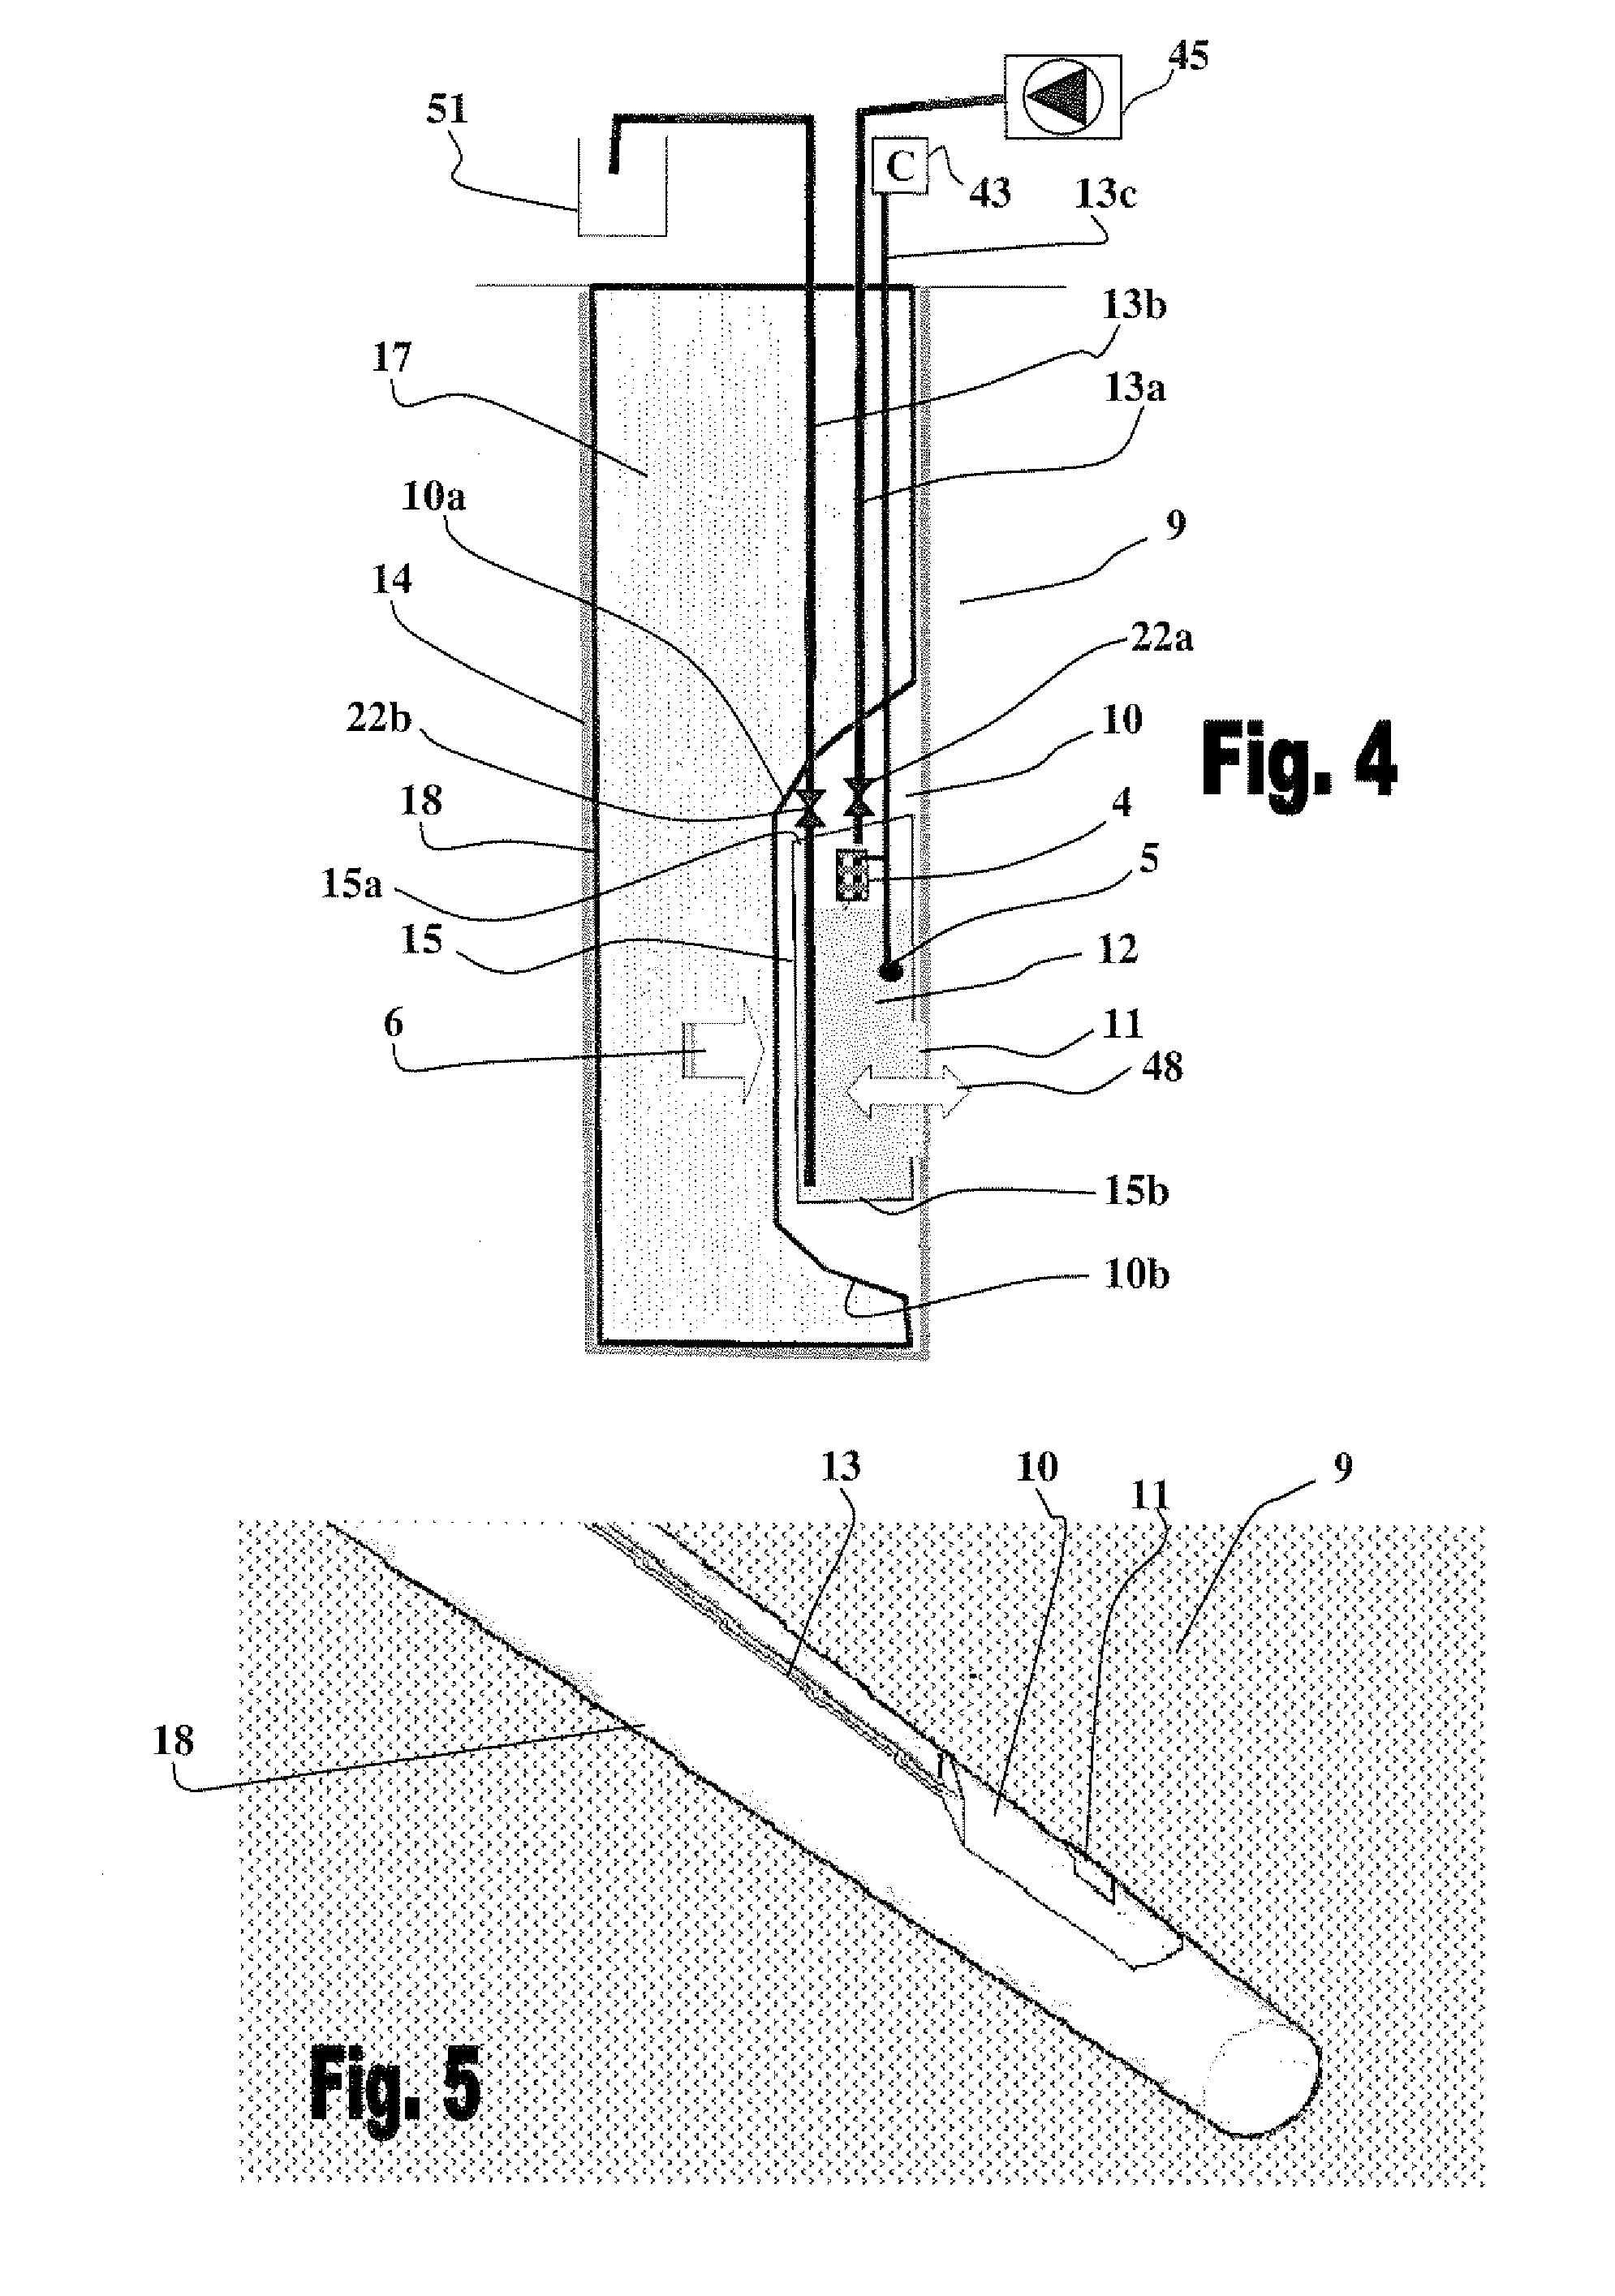 Method and system for monitoring soil properties